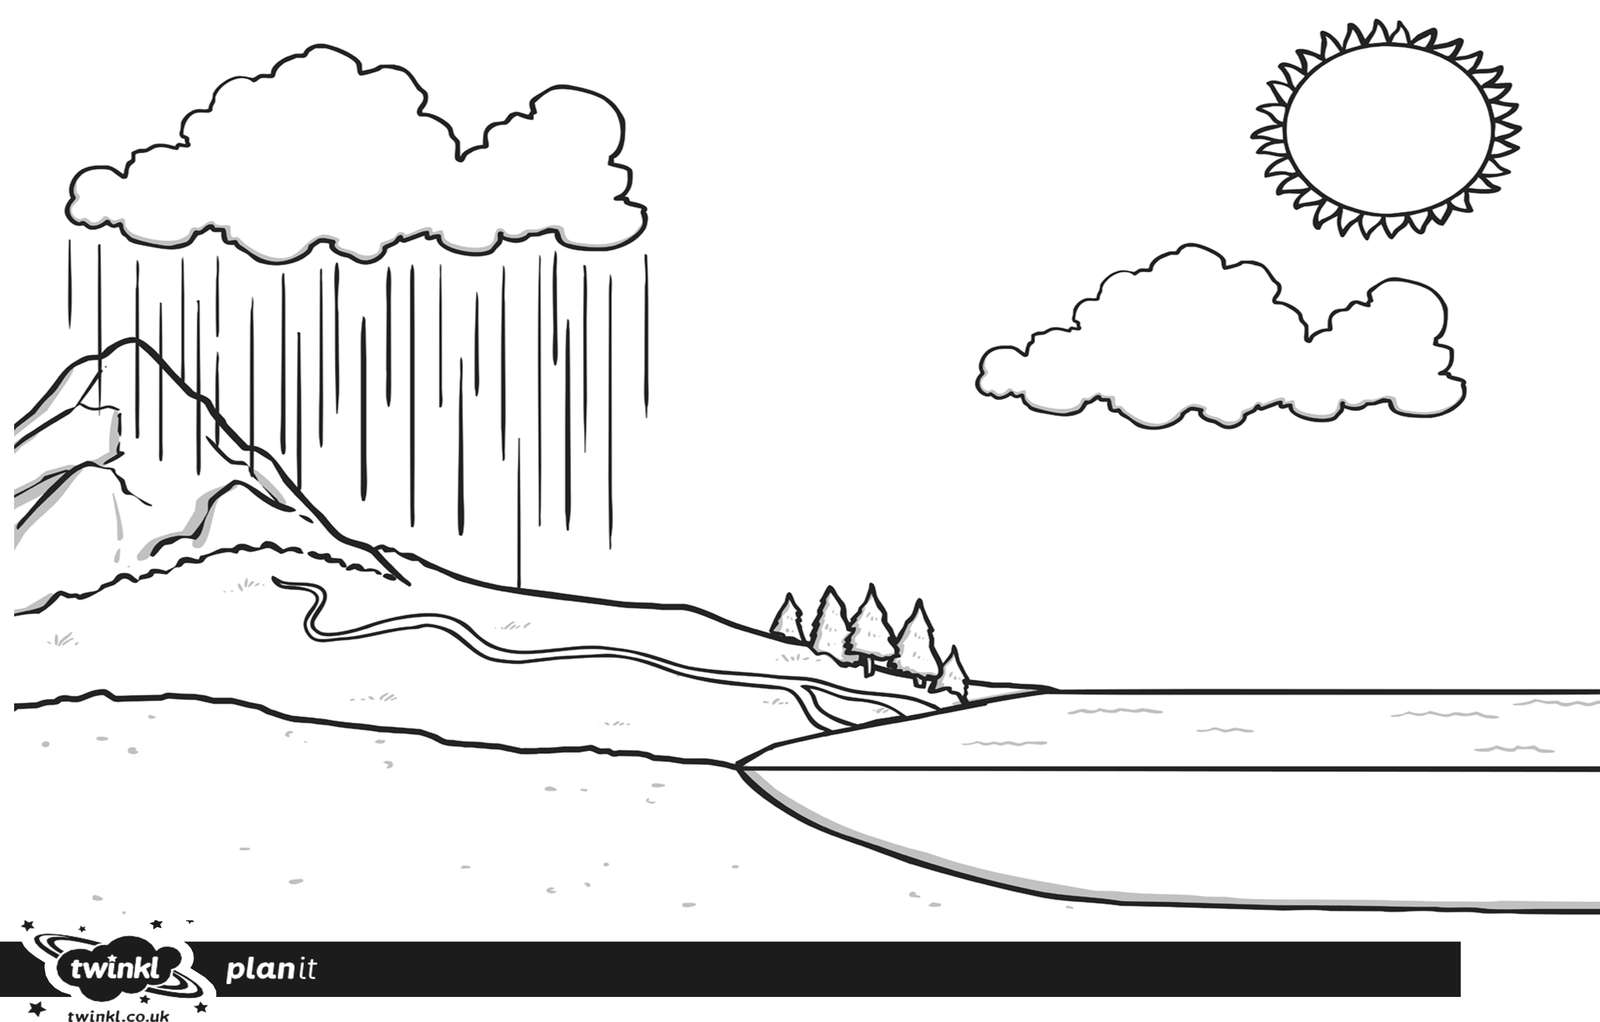 The Water Cycle online puzzle